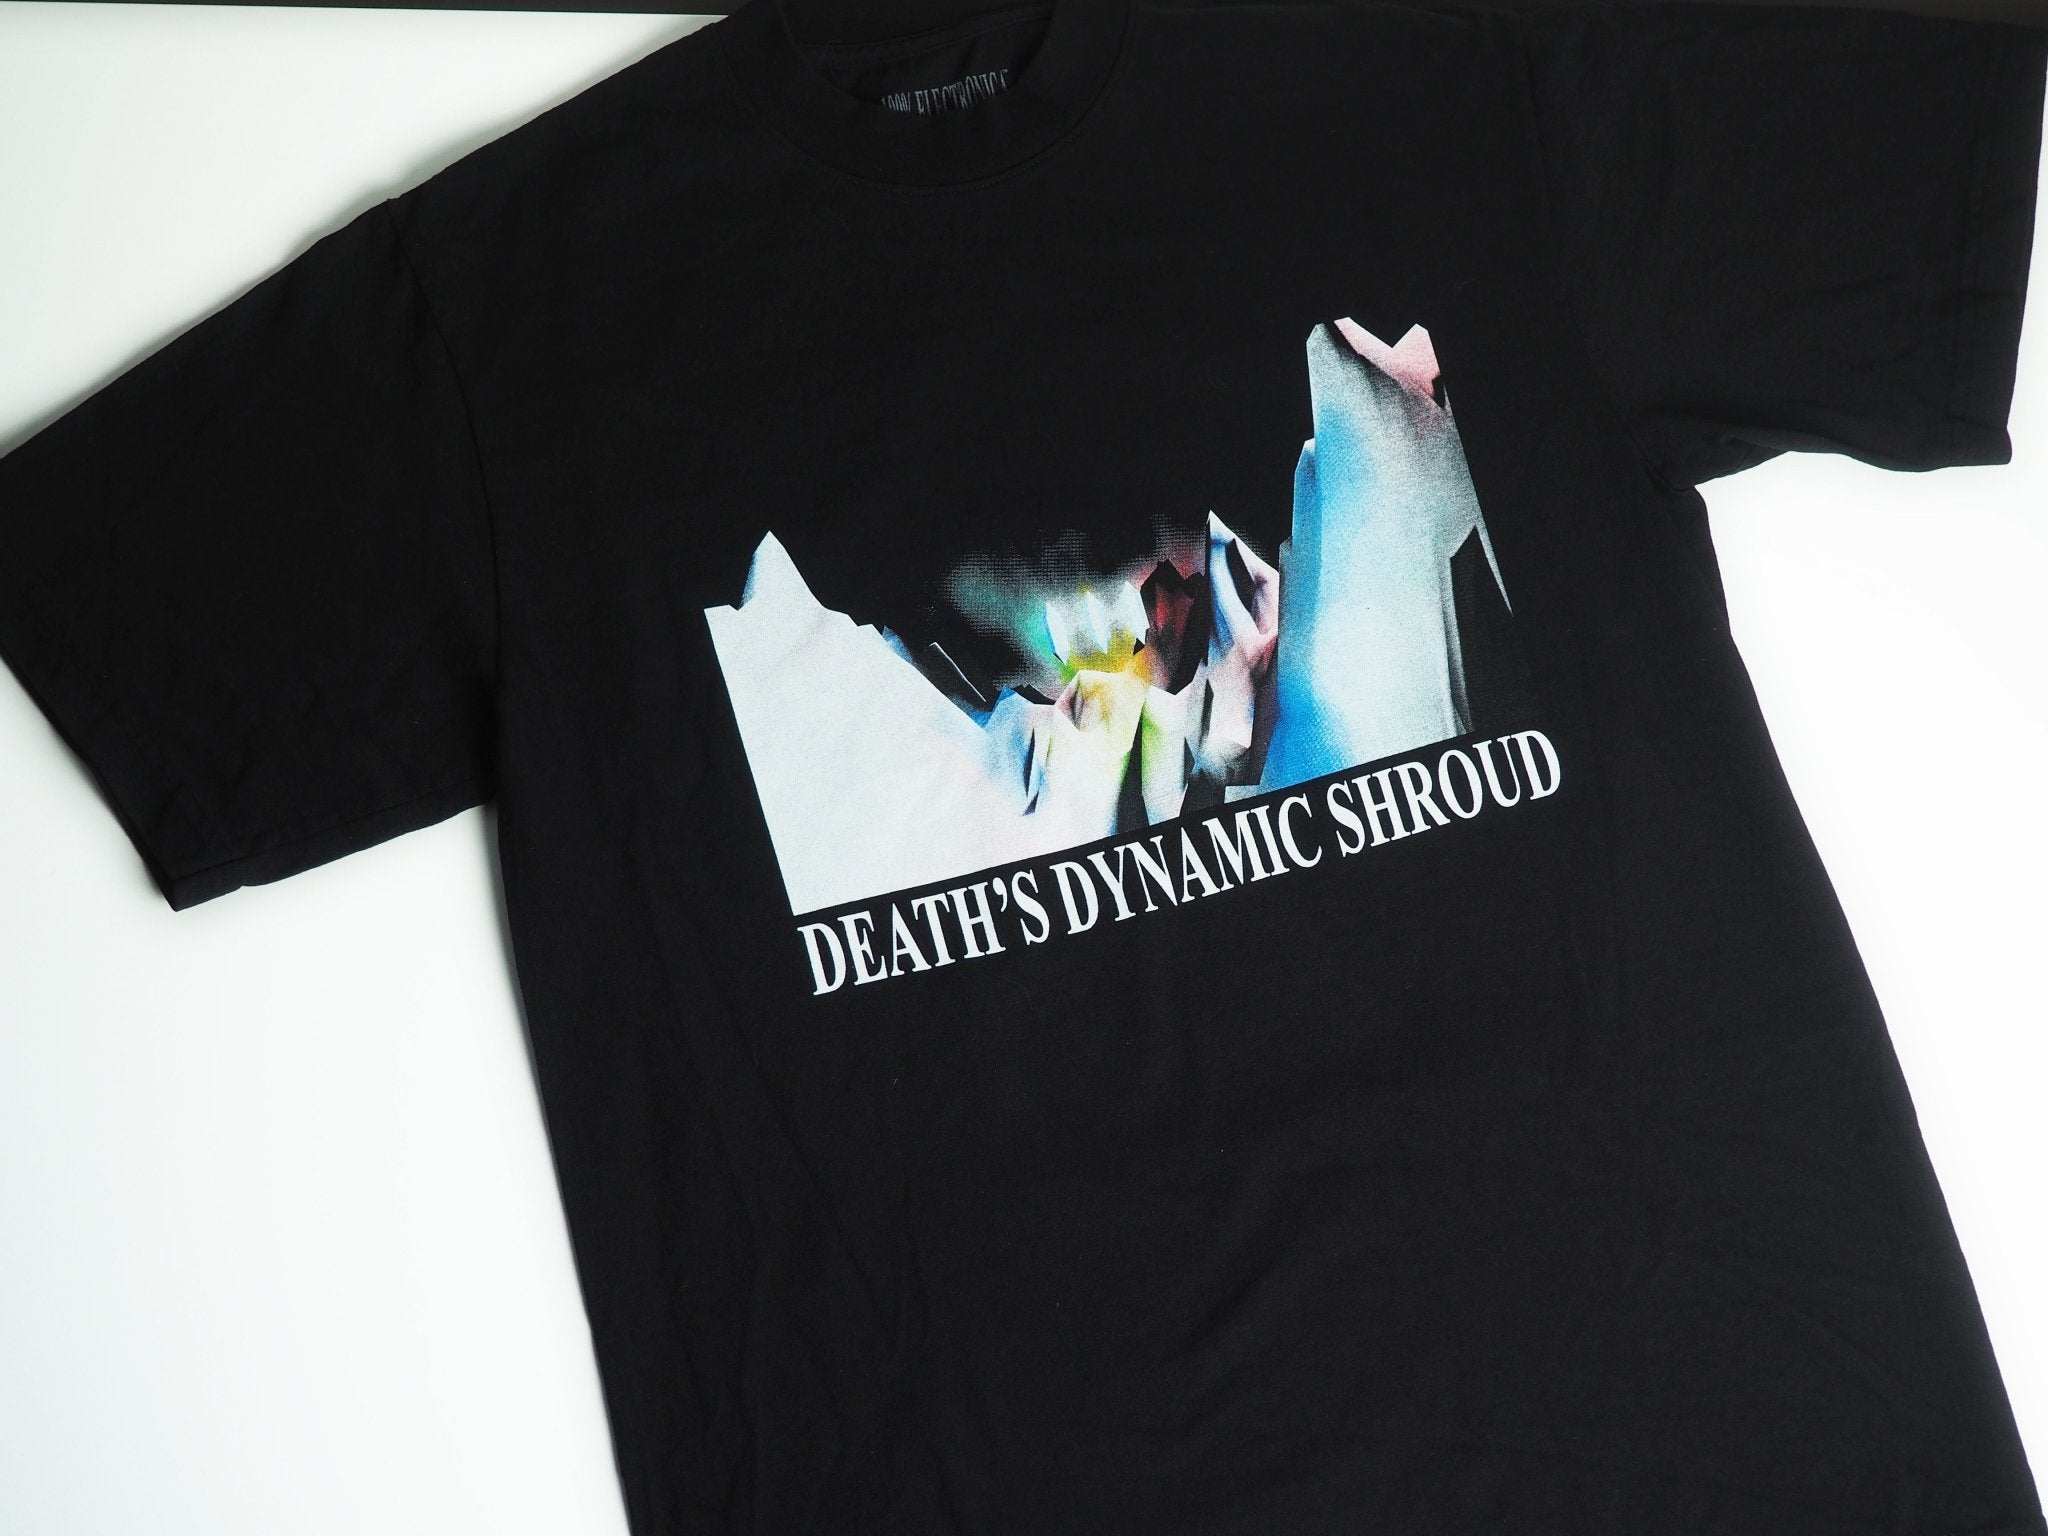 death's dynamic shroud - Judgment Bolt T-Shirt - 100% Electronica Official Store (Photo 4)